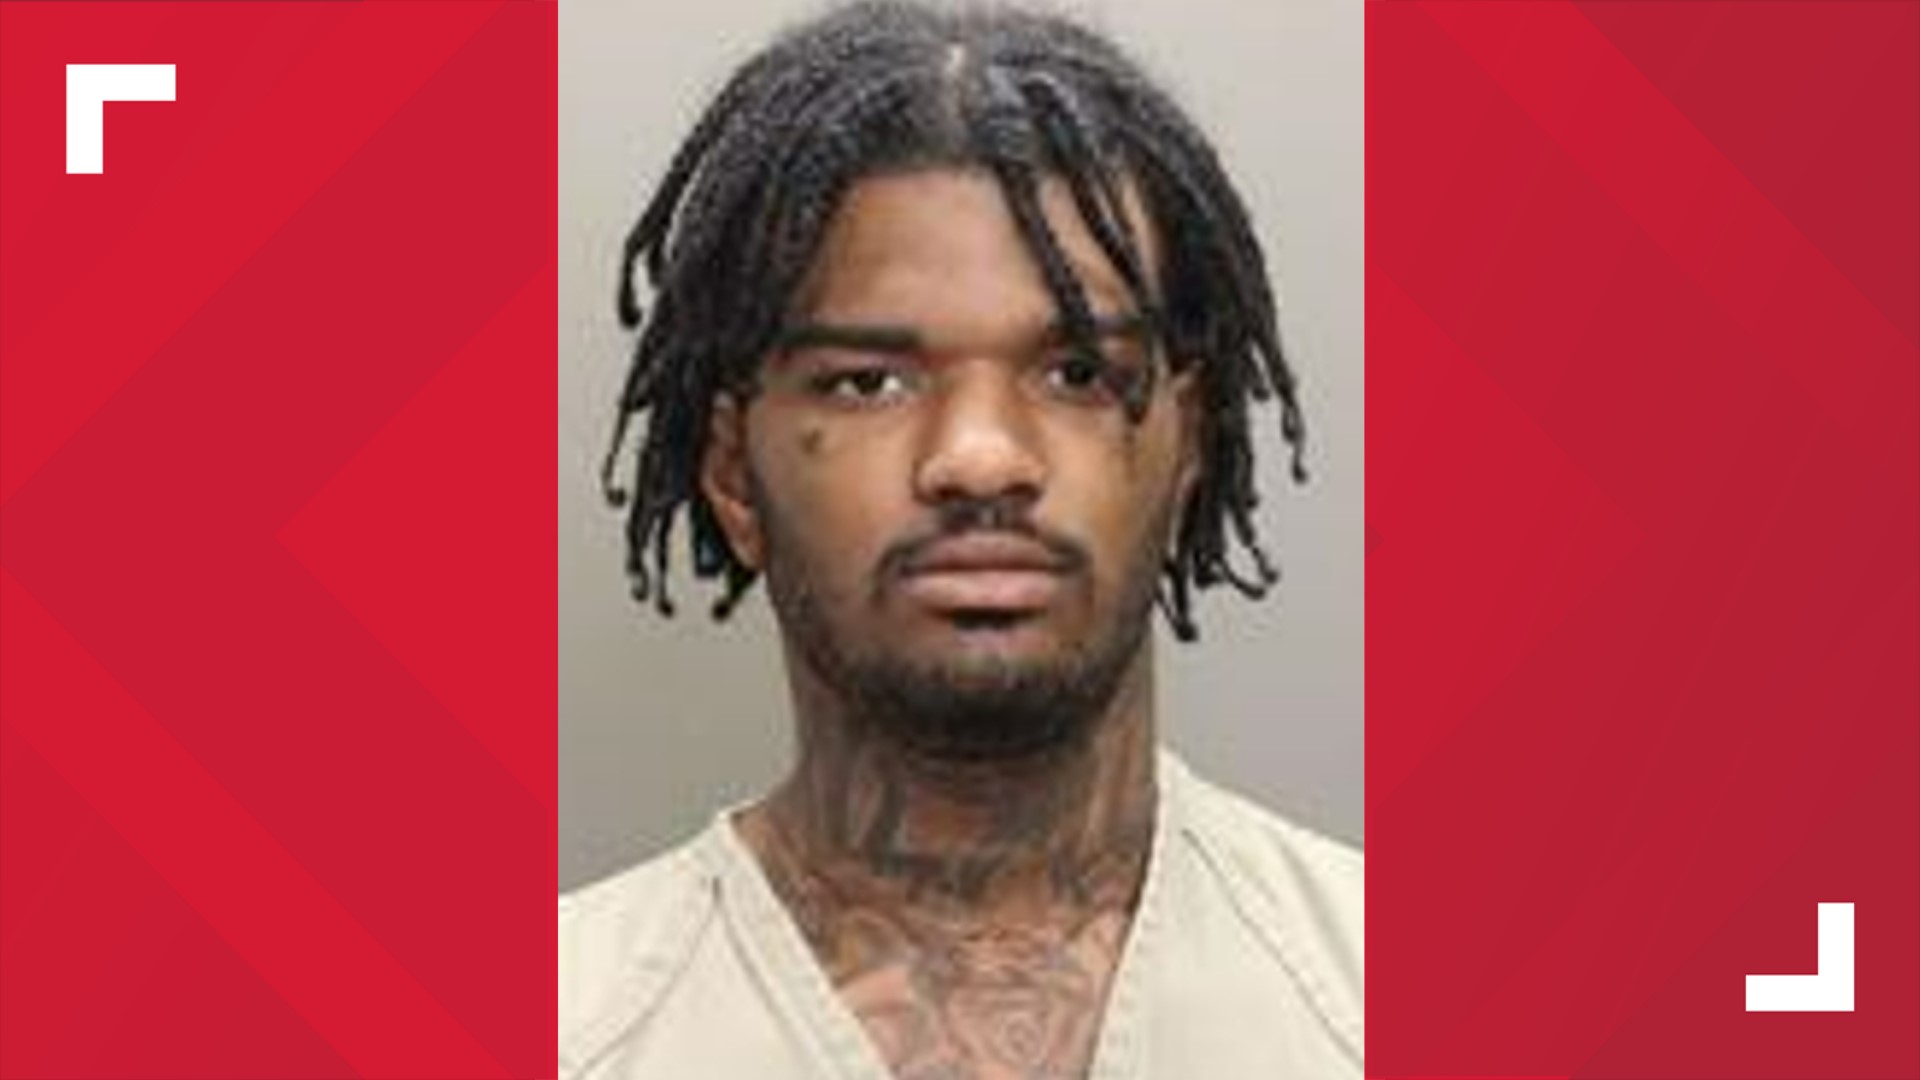 Omarion King is charged with two counts of murder.